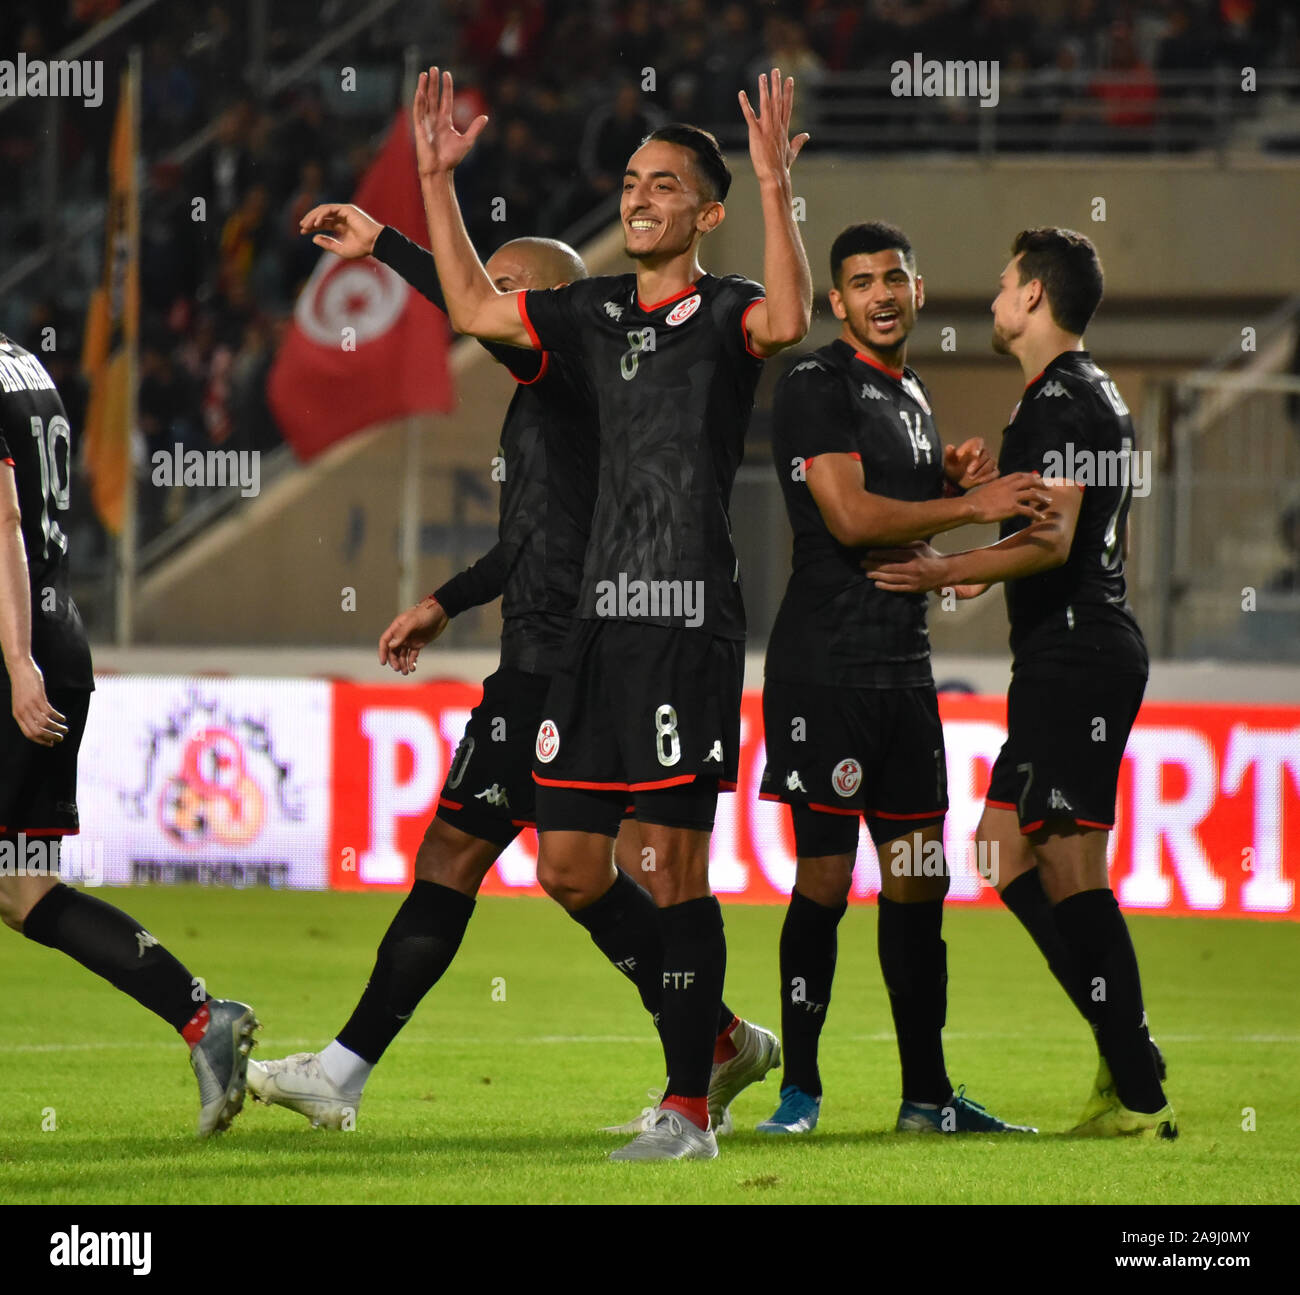 Tunis, Tunisia. 15th Nov, 2019. Tunisia's midfielder Saif-Eddine Khaoui (2nd-R) celebrates his goal during the 2021 Africa Cup of Nations group J qualifying football match between Tunisia and Libya at the Stade Olympique de Rades.(Final score; Tunisia 4:1 Libya) Credit: SOPA Images Limited/Alamy Live News Stock Photo